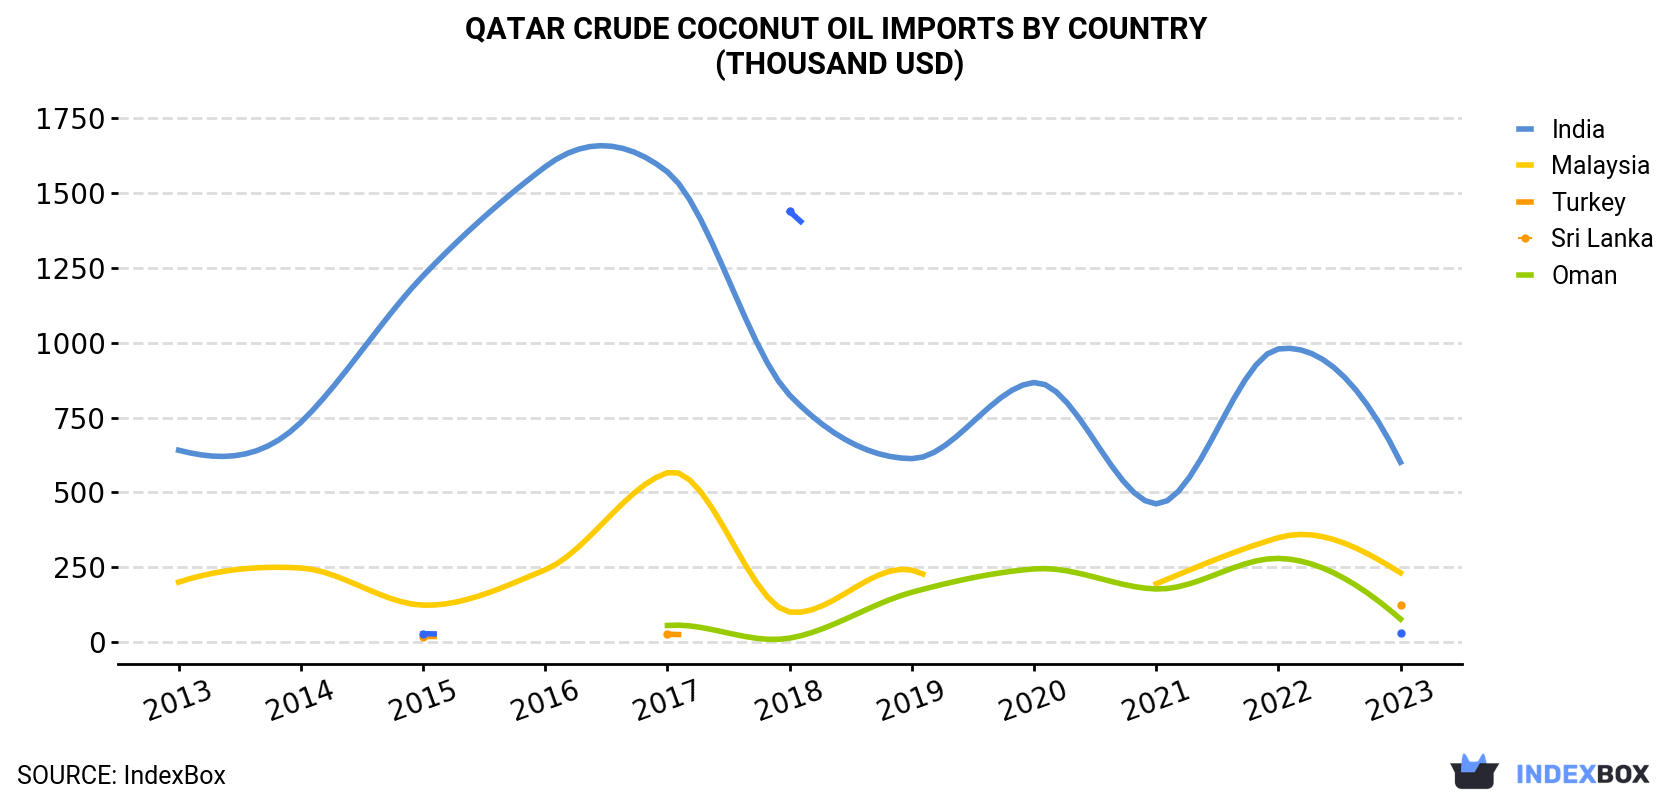 Qatar Crude Coconut Oil Imports By Country (Thousand USD)